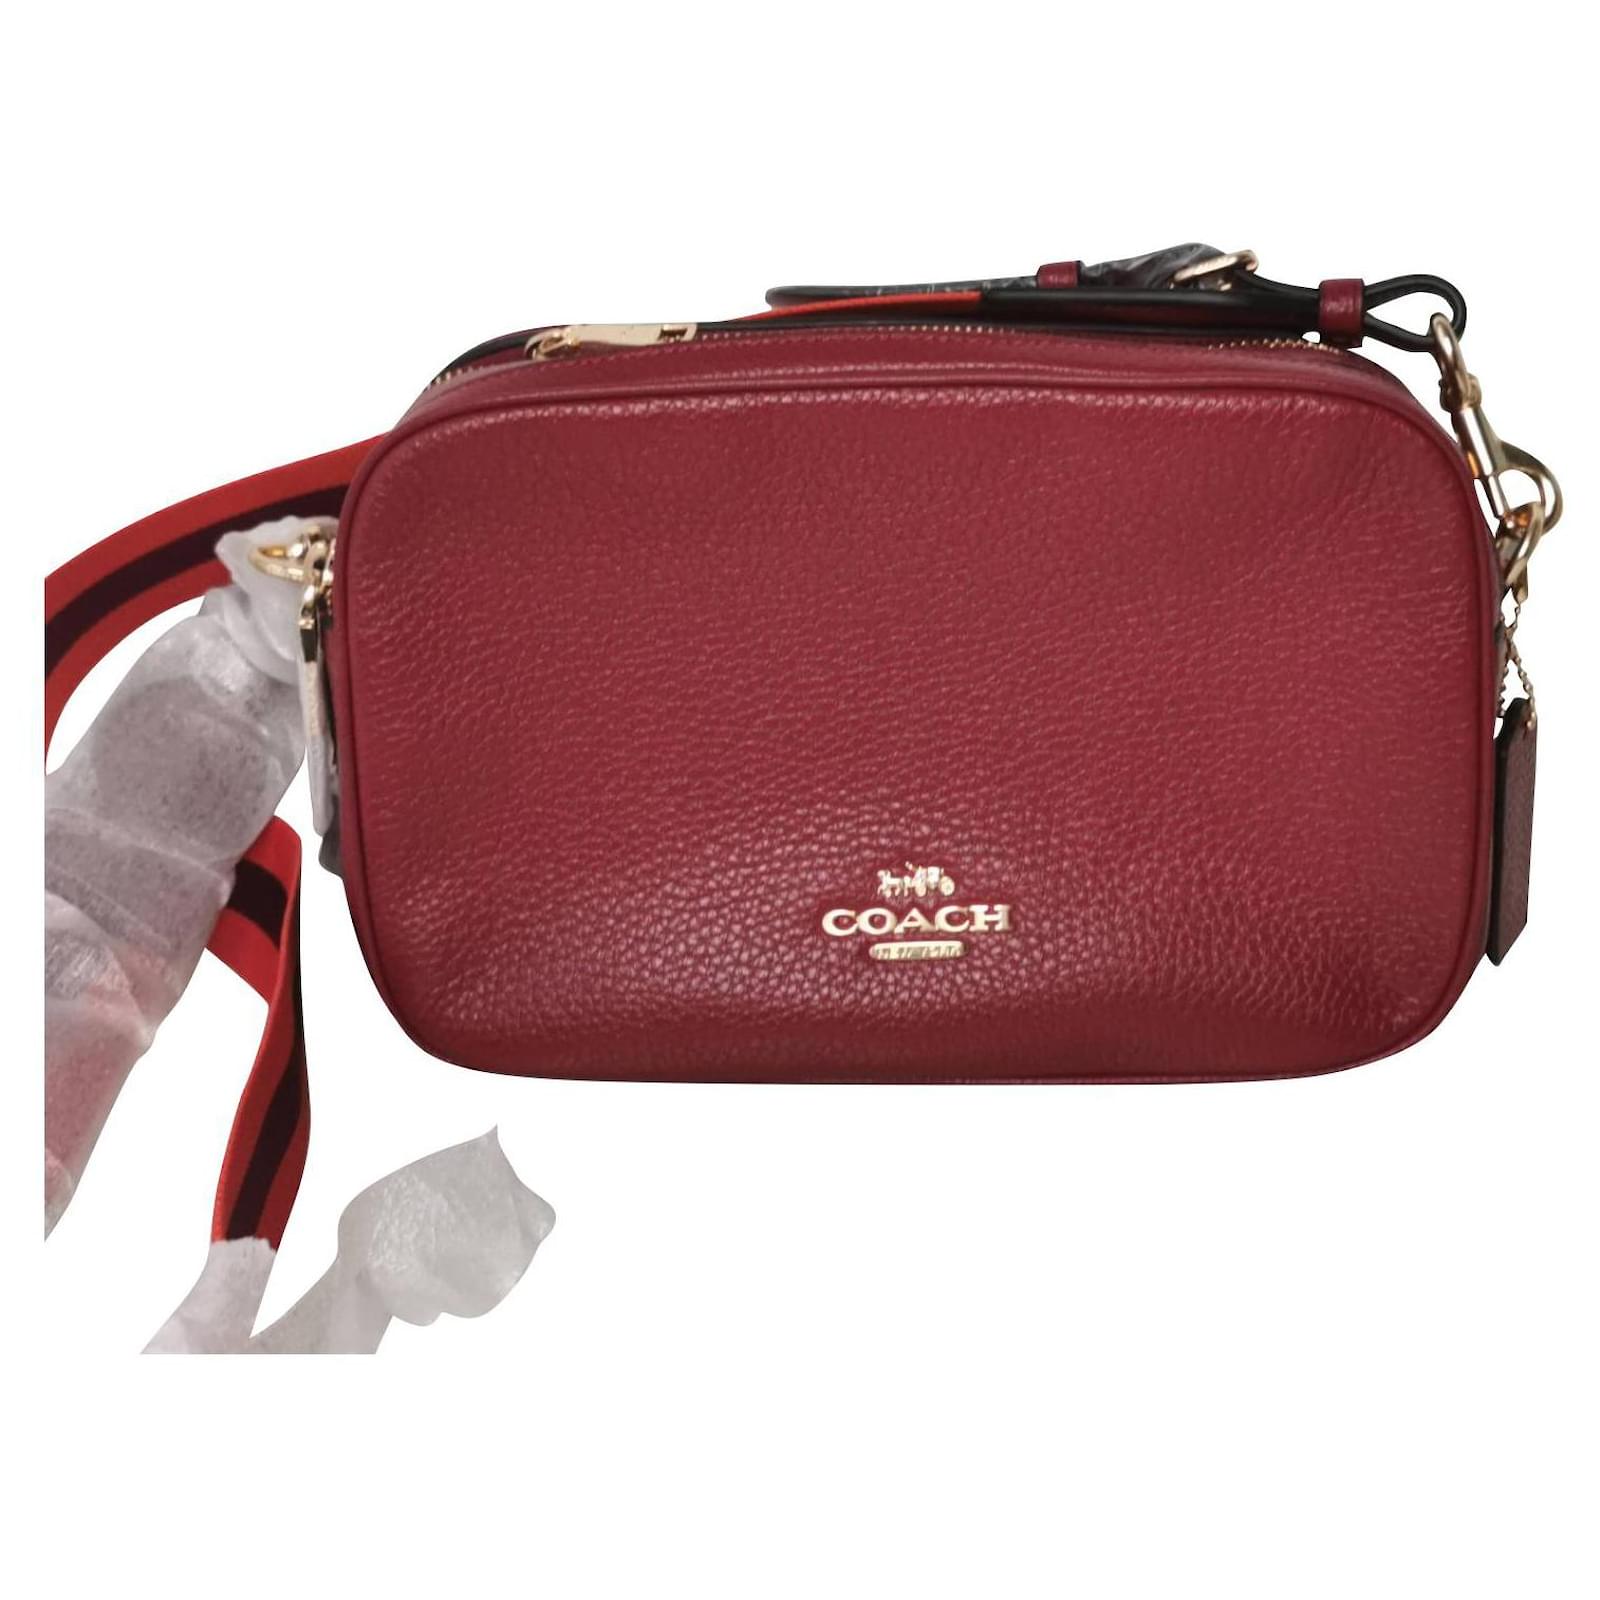 Vintage Red Leather Coach Purse | Urban Outfitters Singapore Official Site